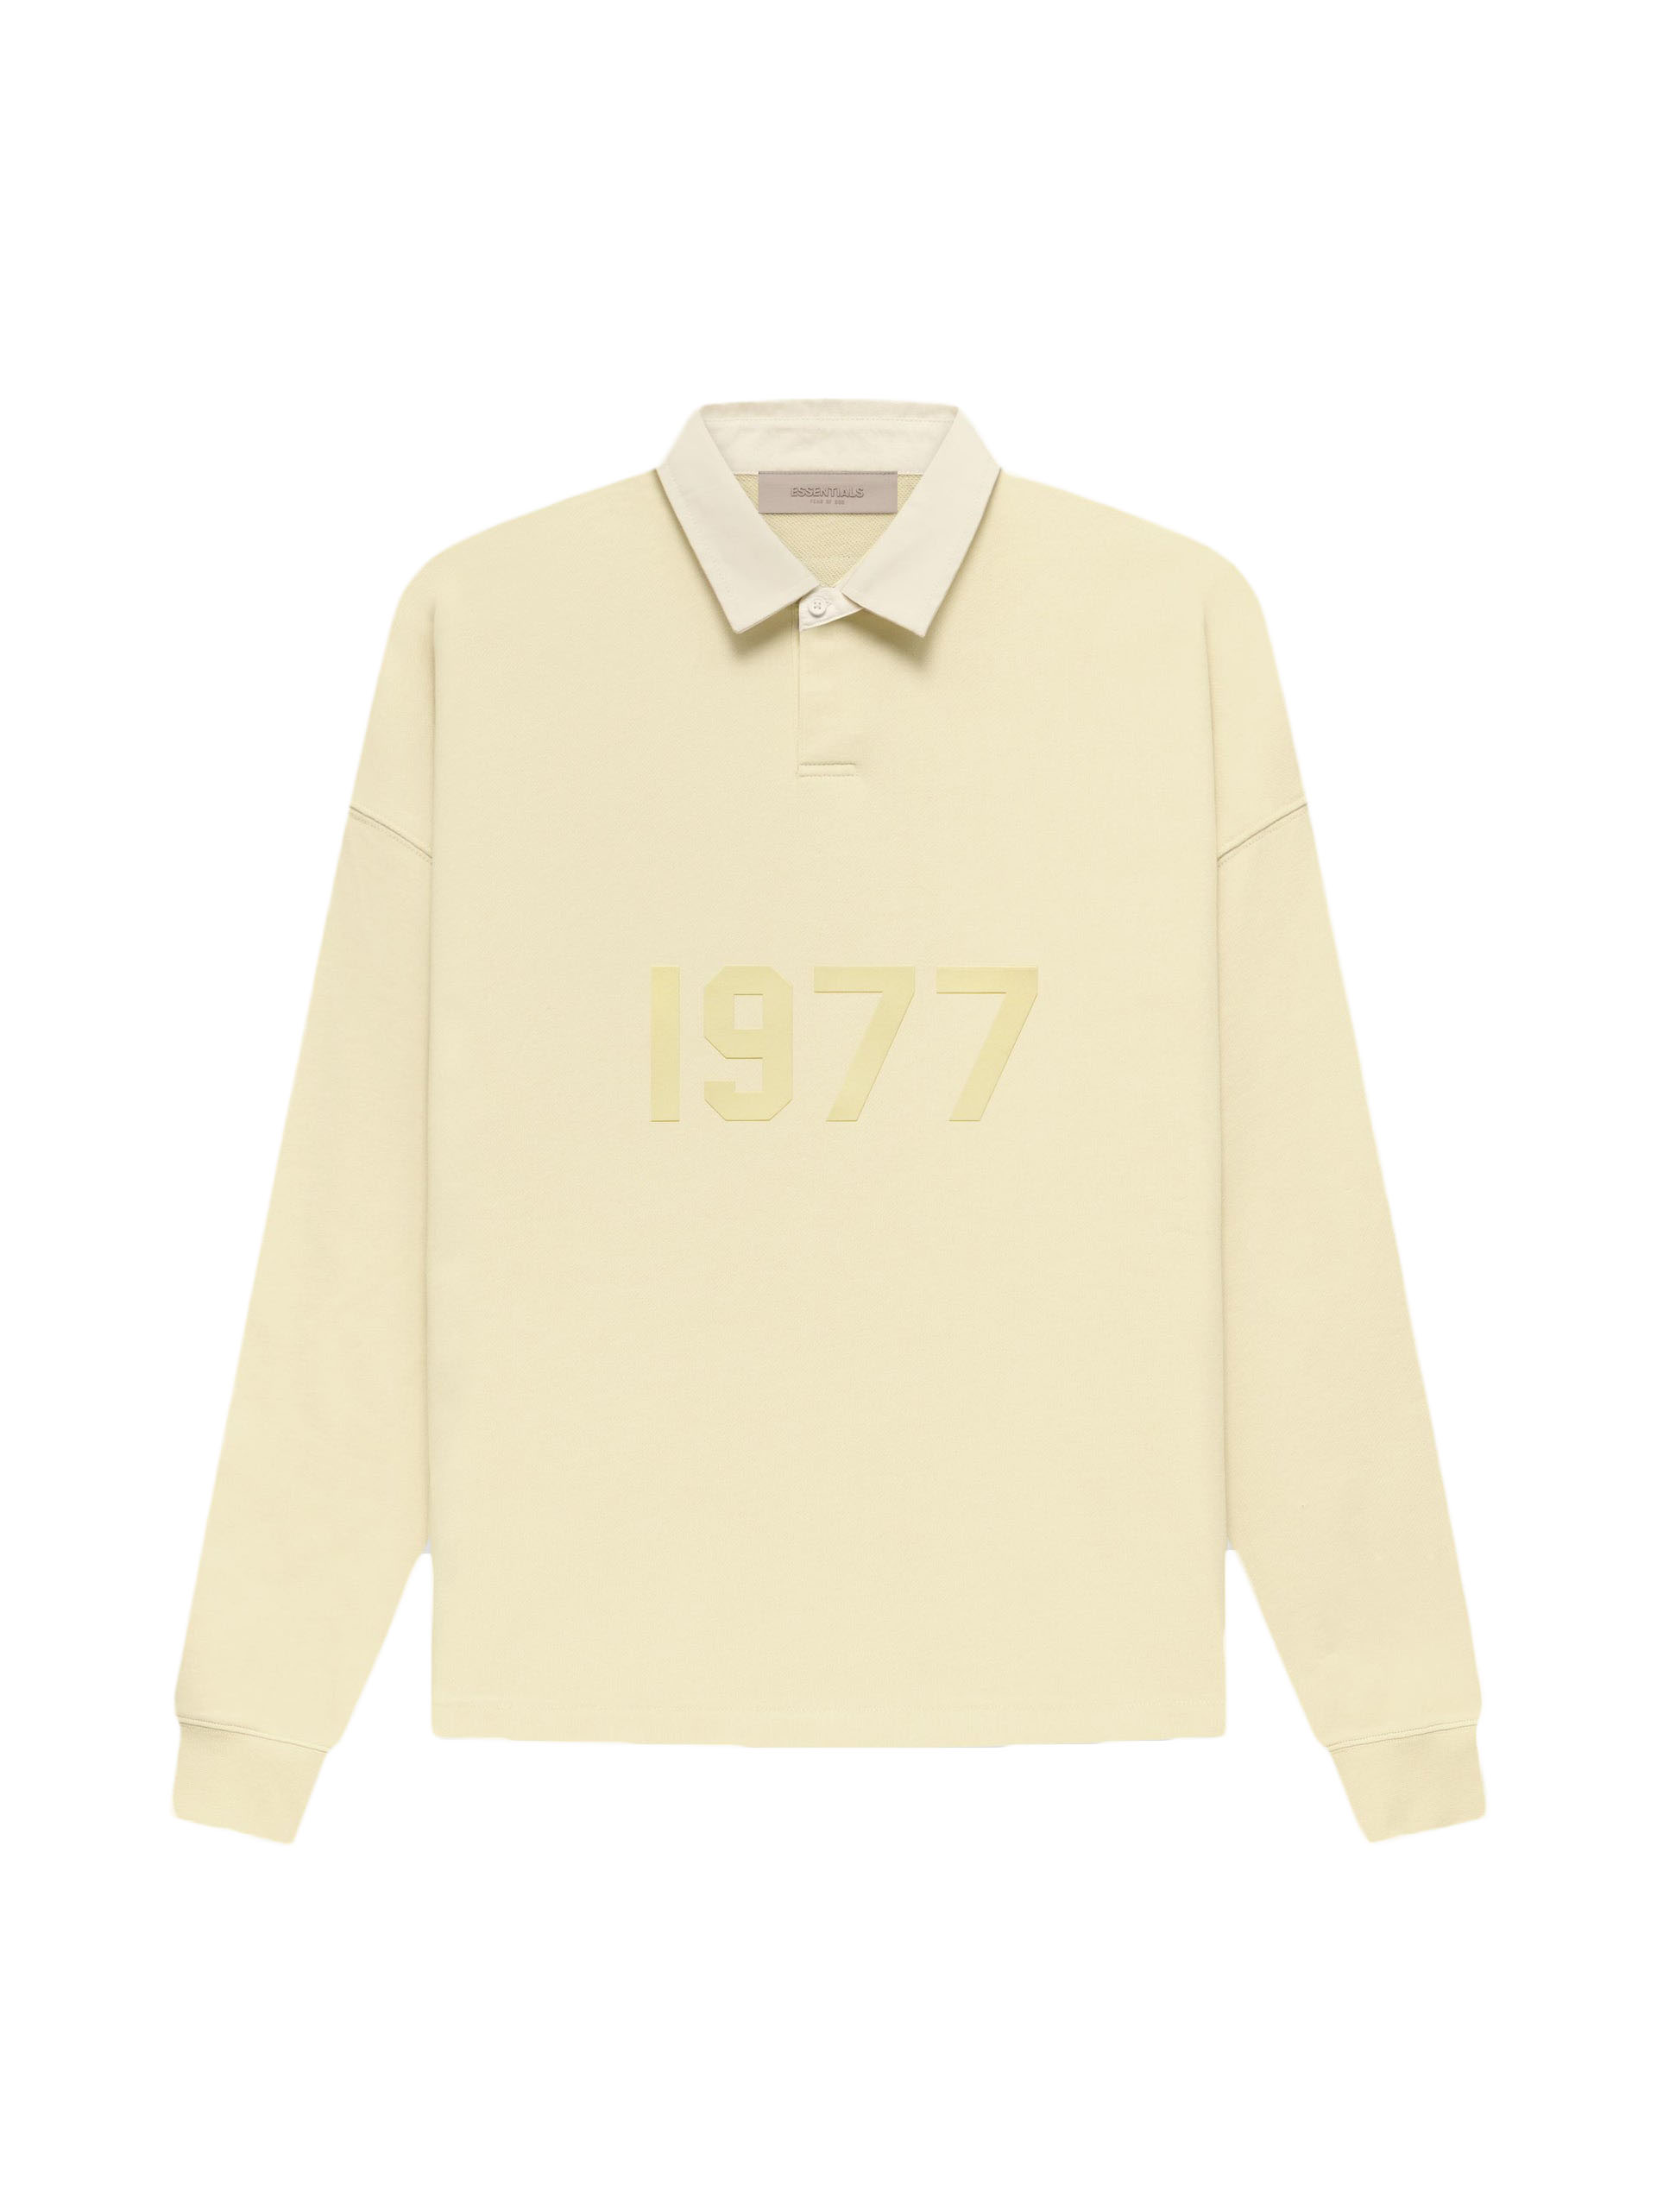 Fear of God Essentials 1977 Rugby Wheat Men's - SS22 - US